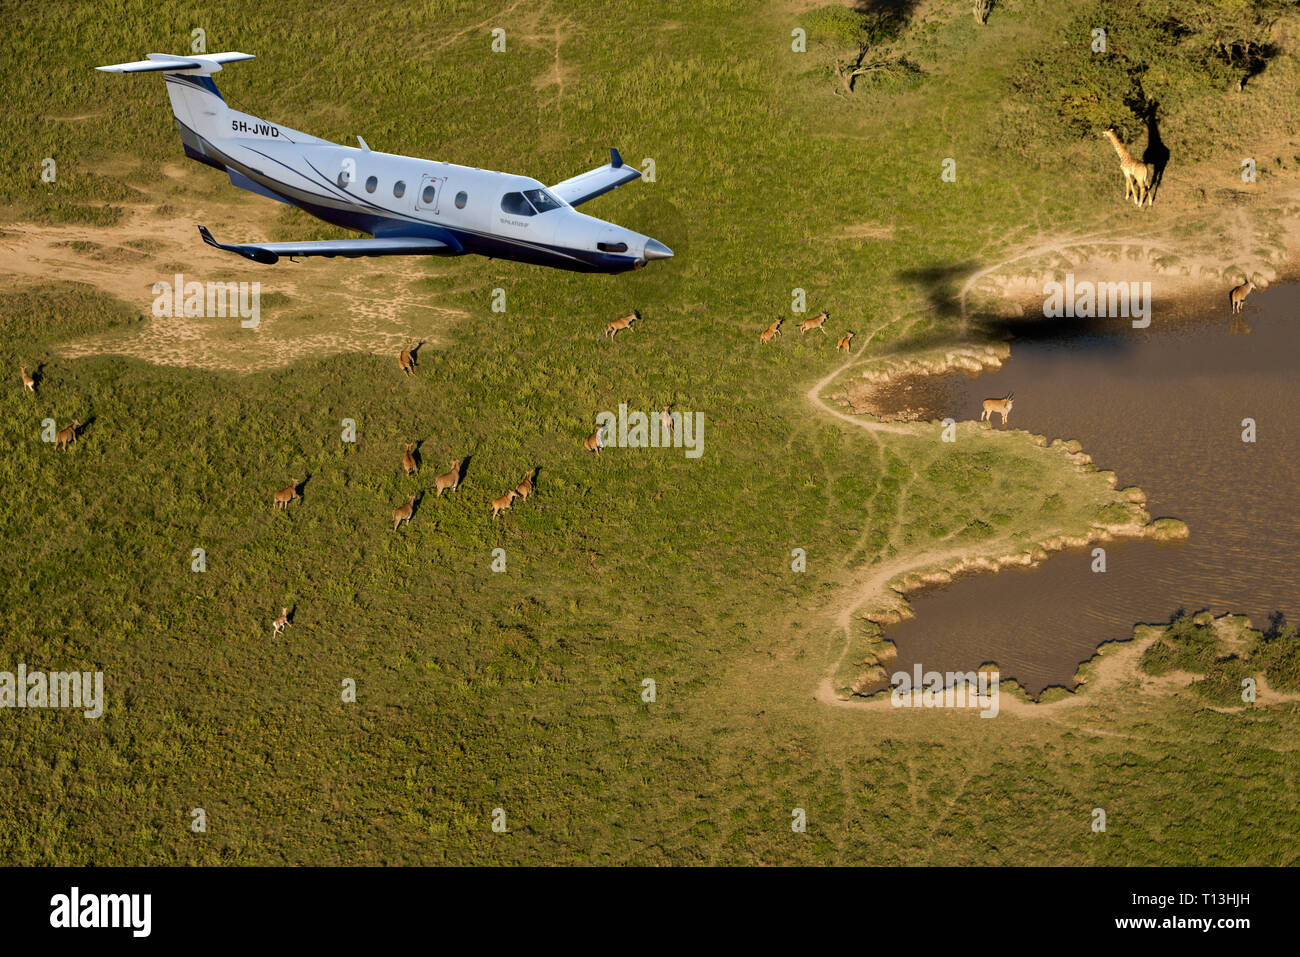 An air to air shot of a Pilatus PC12 turboprop aircraft over wild animals of the Serengeti plains, in Africa. Stock Photo